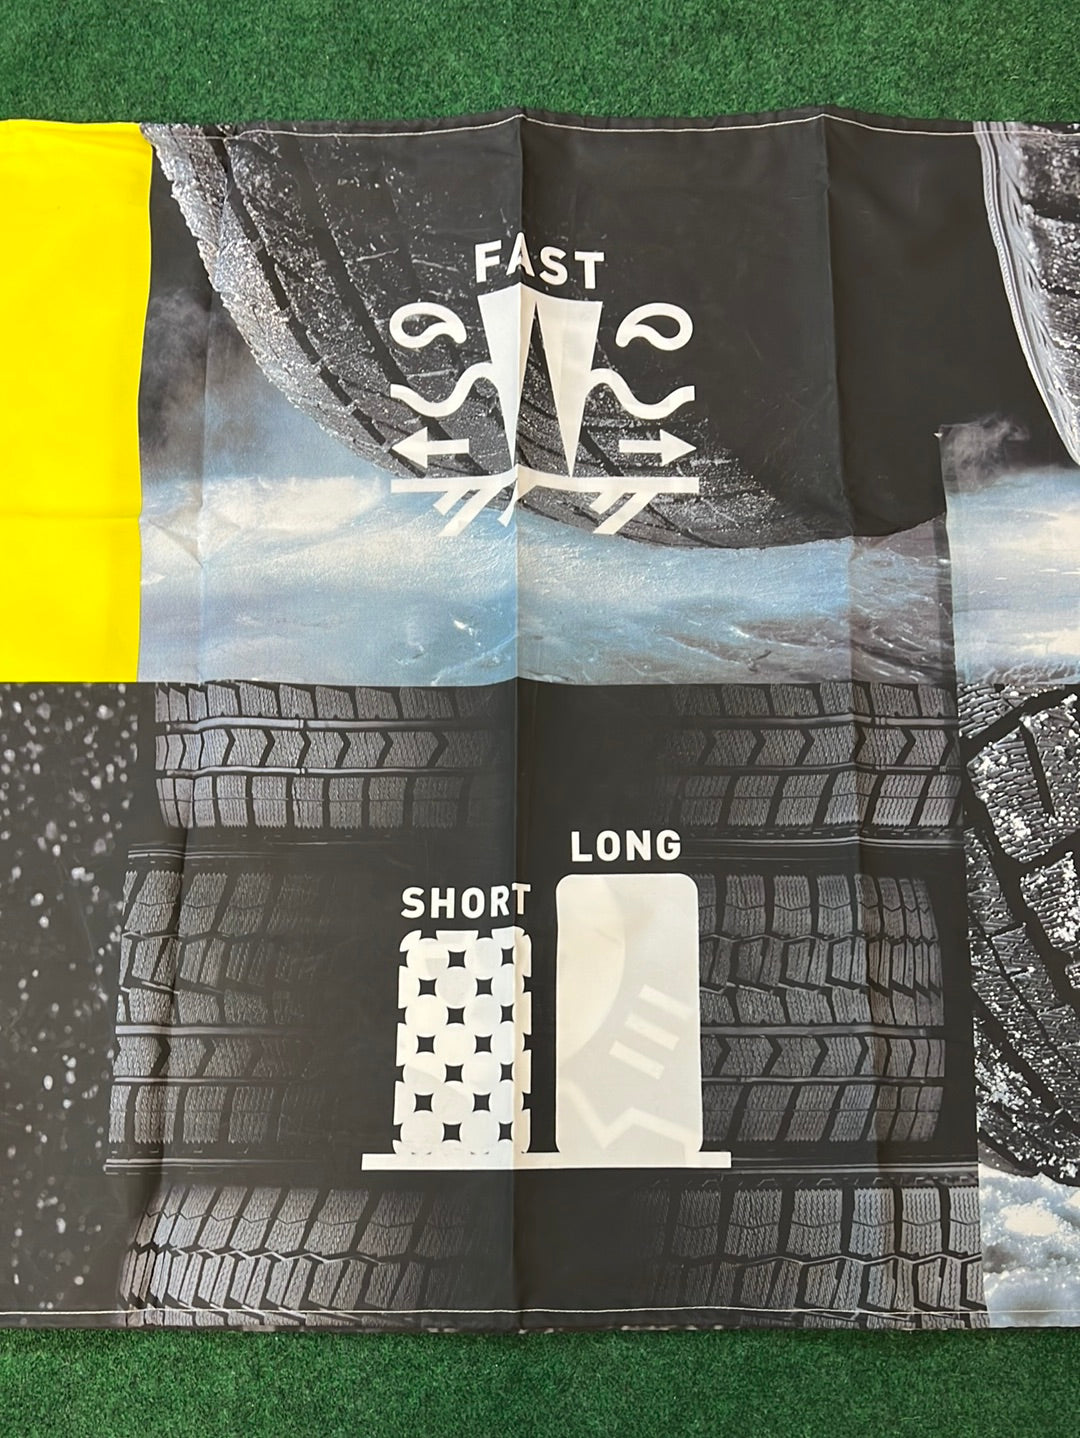 Dunlop: “Let’s put on your tires.” - 2022 Retail Extra Large Horizontal Banner